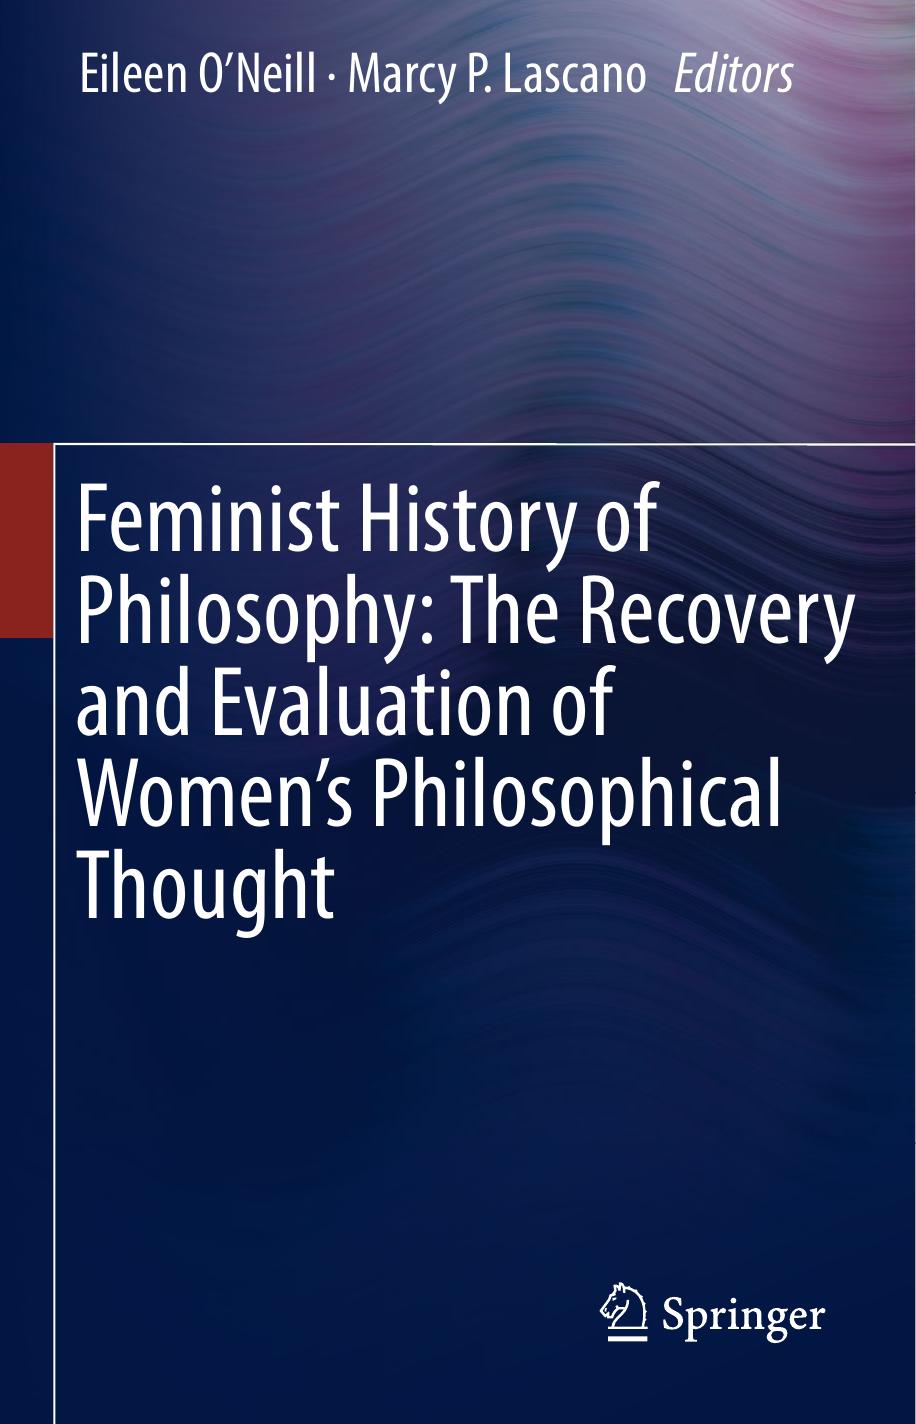 Feminist History of Philosophy: The Recovery and Evaluation of Women's Philosophical Thought